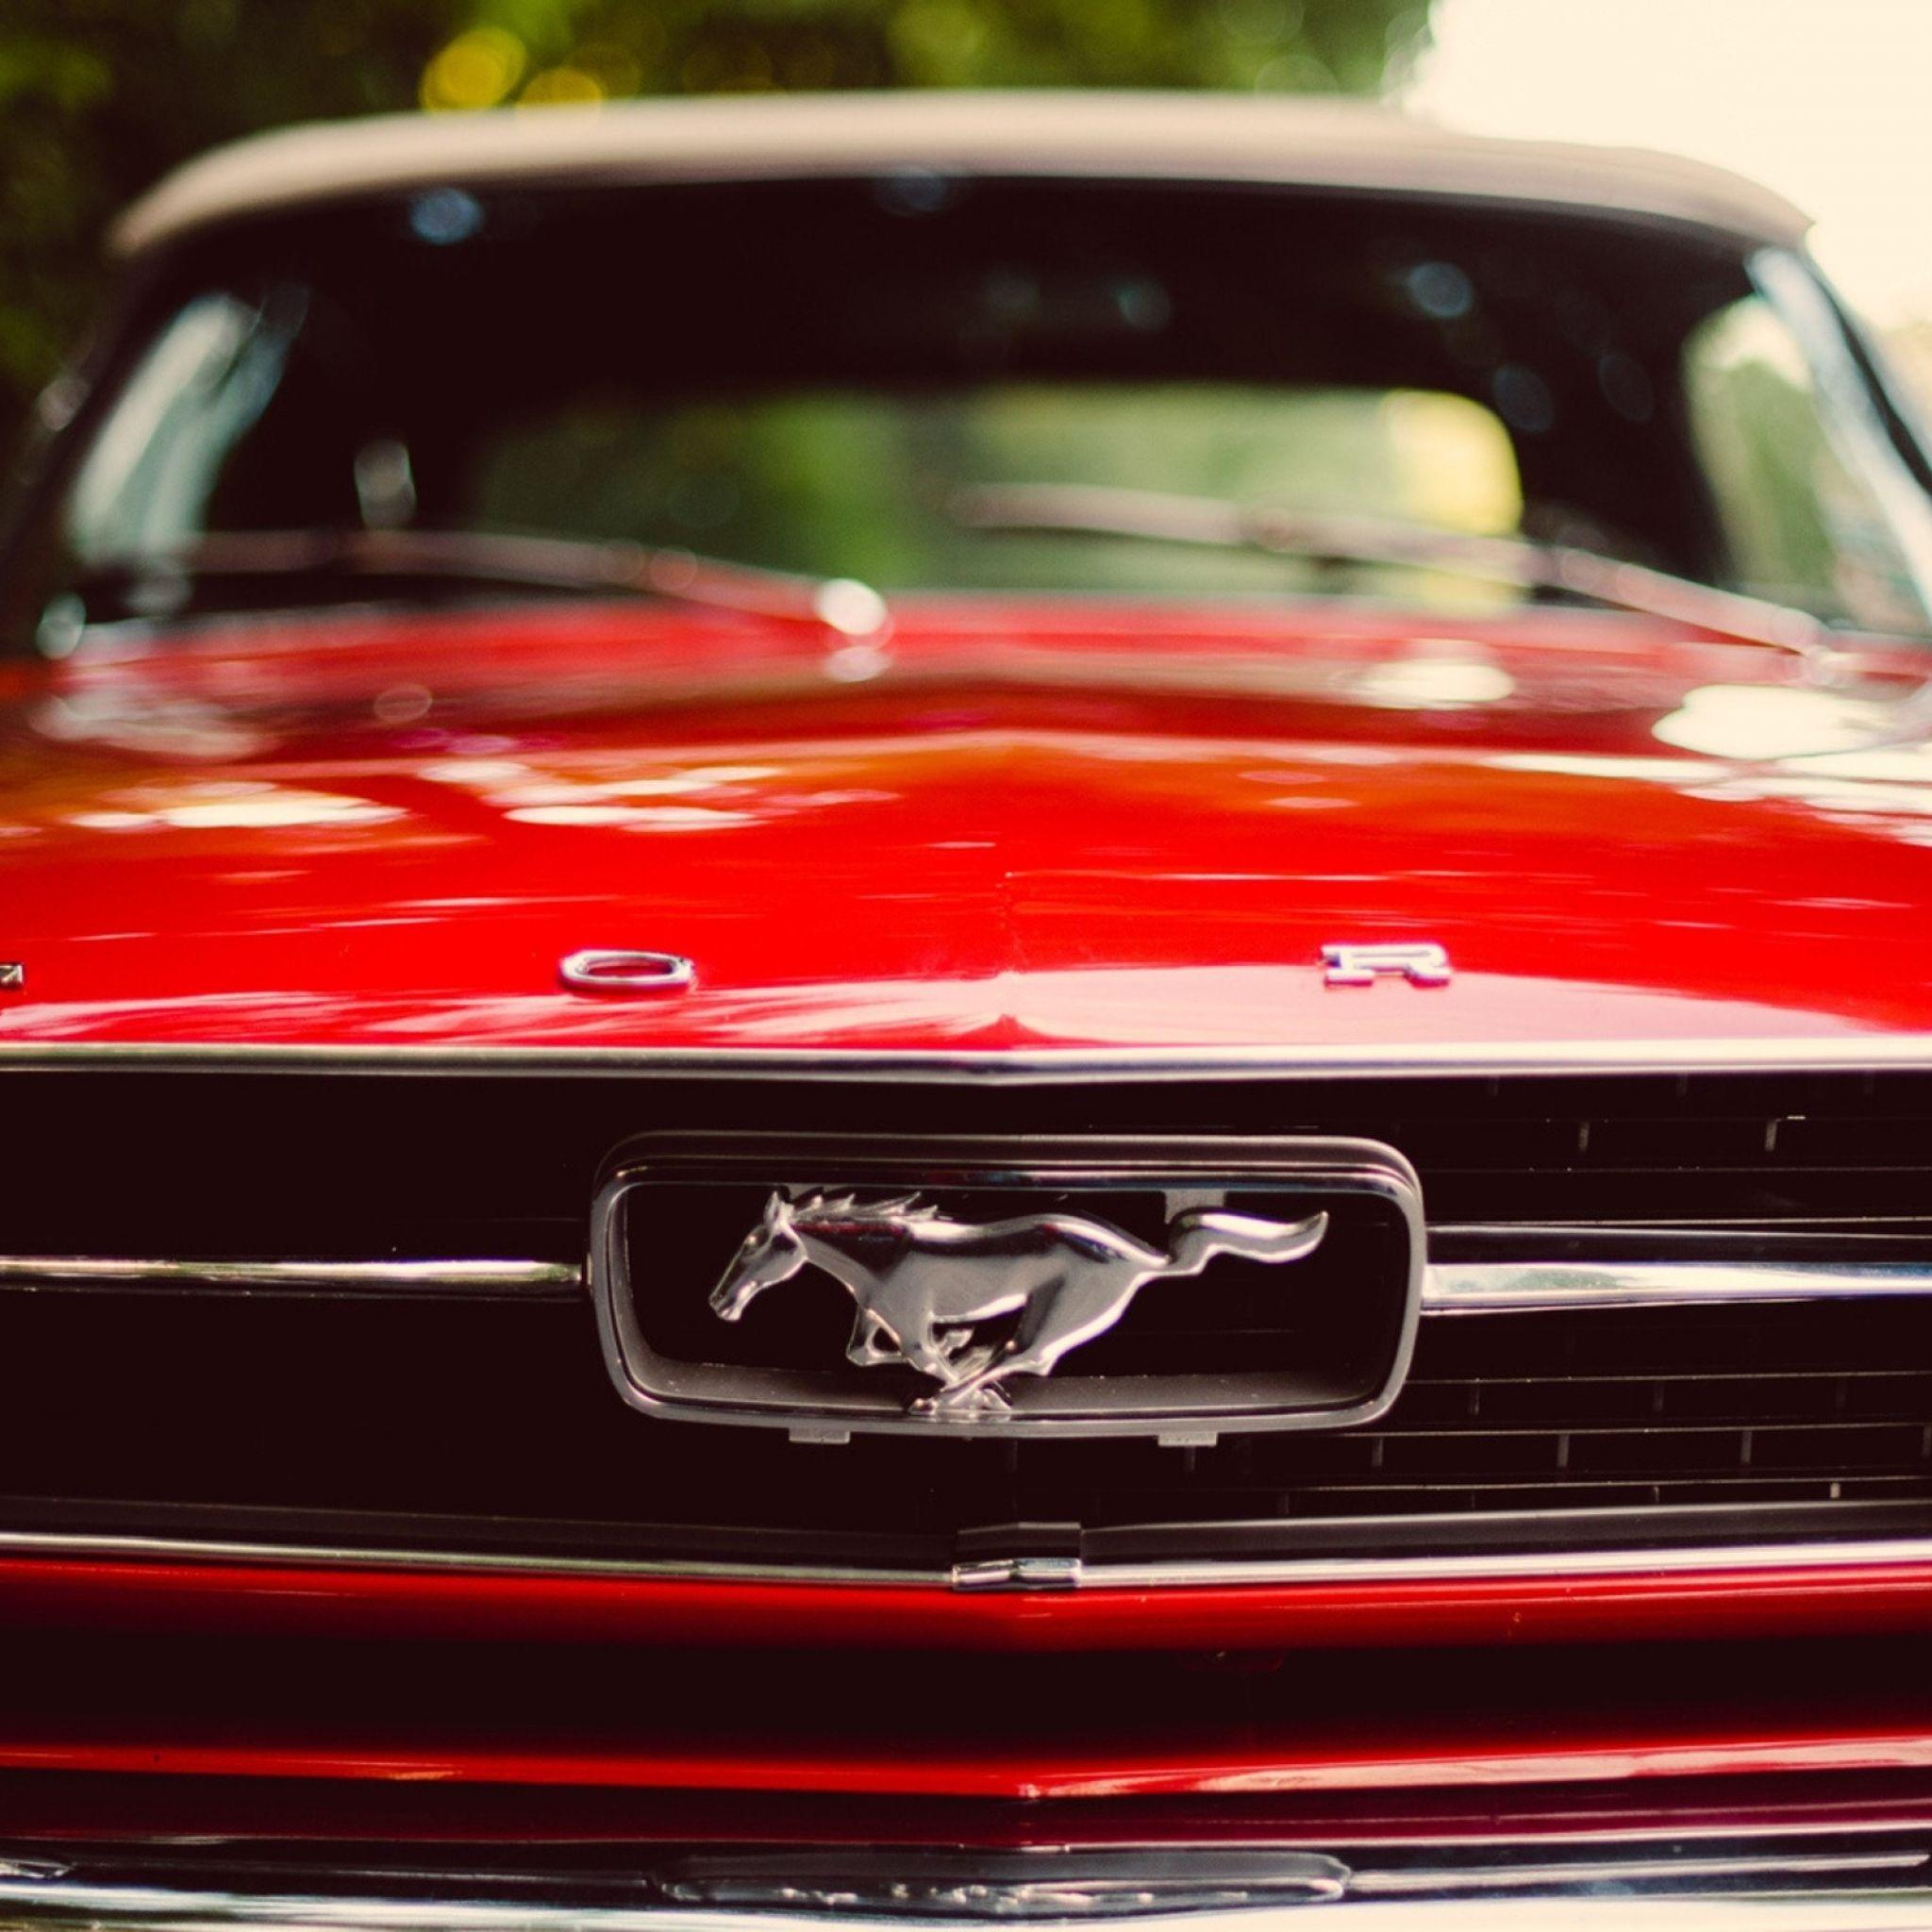 Download Wallpaper 2048x2048 Ford mustang, Redder, Auto New iPad